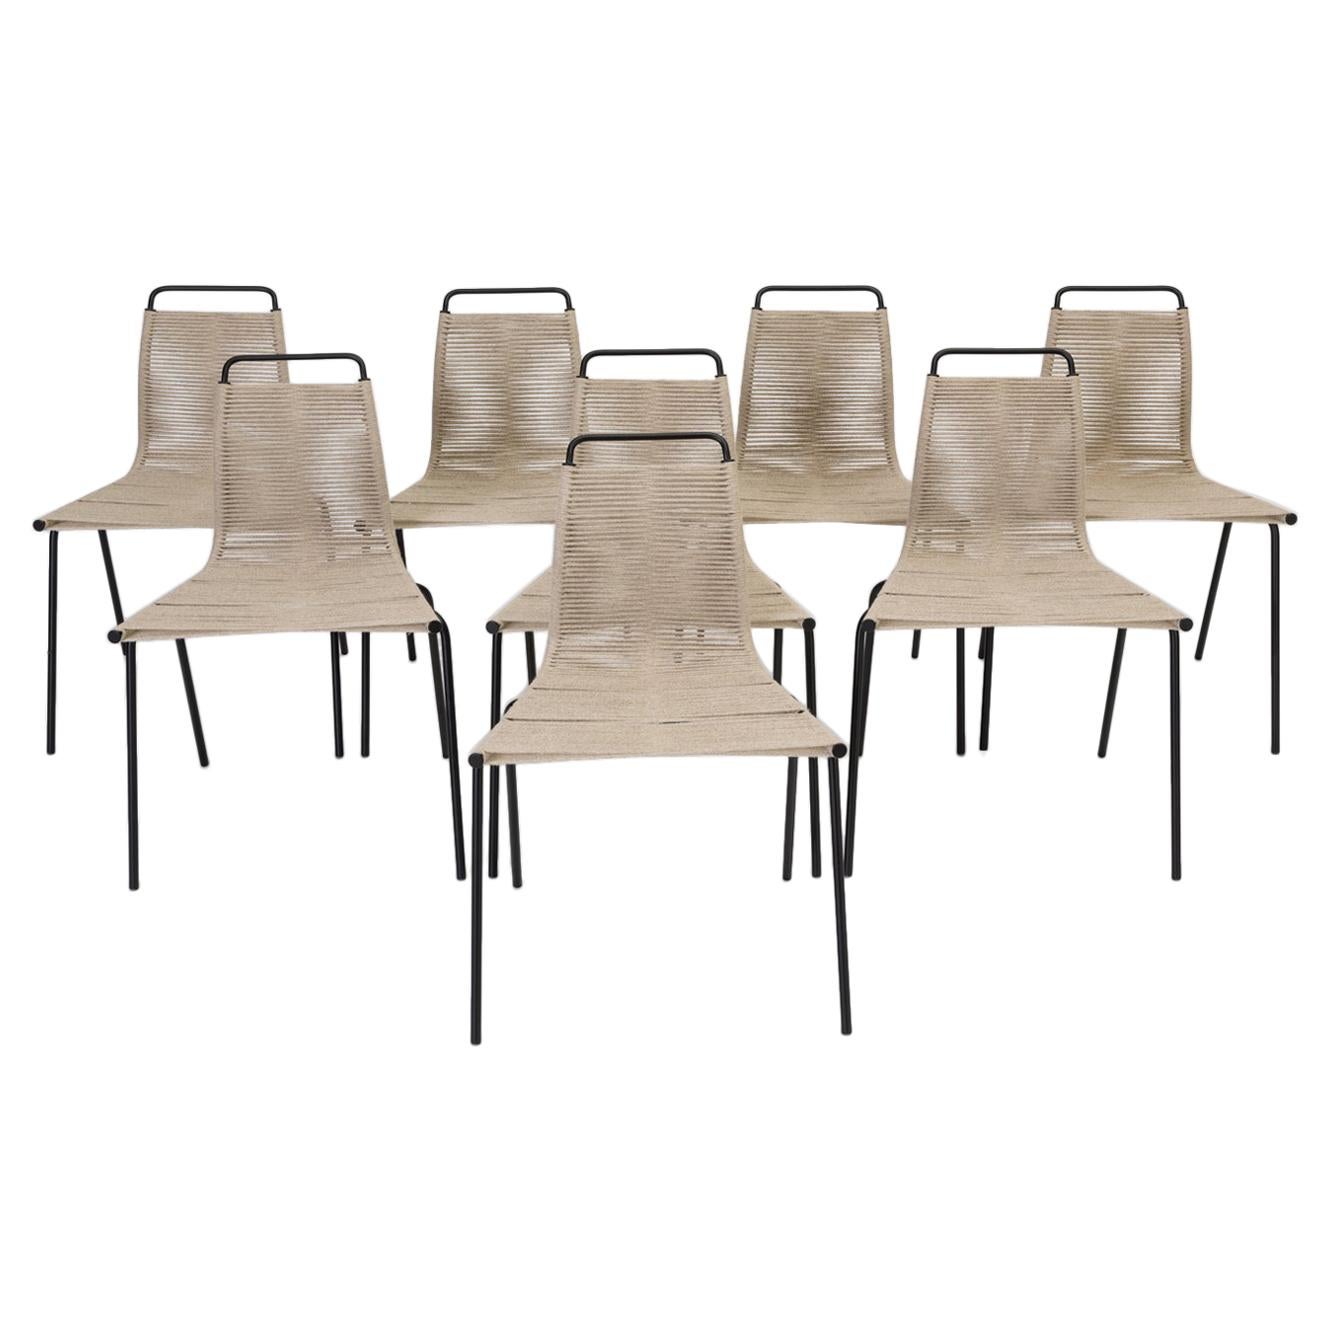 Set of Eight PK-1 Dining Chairs by Poul Kjaerholm